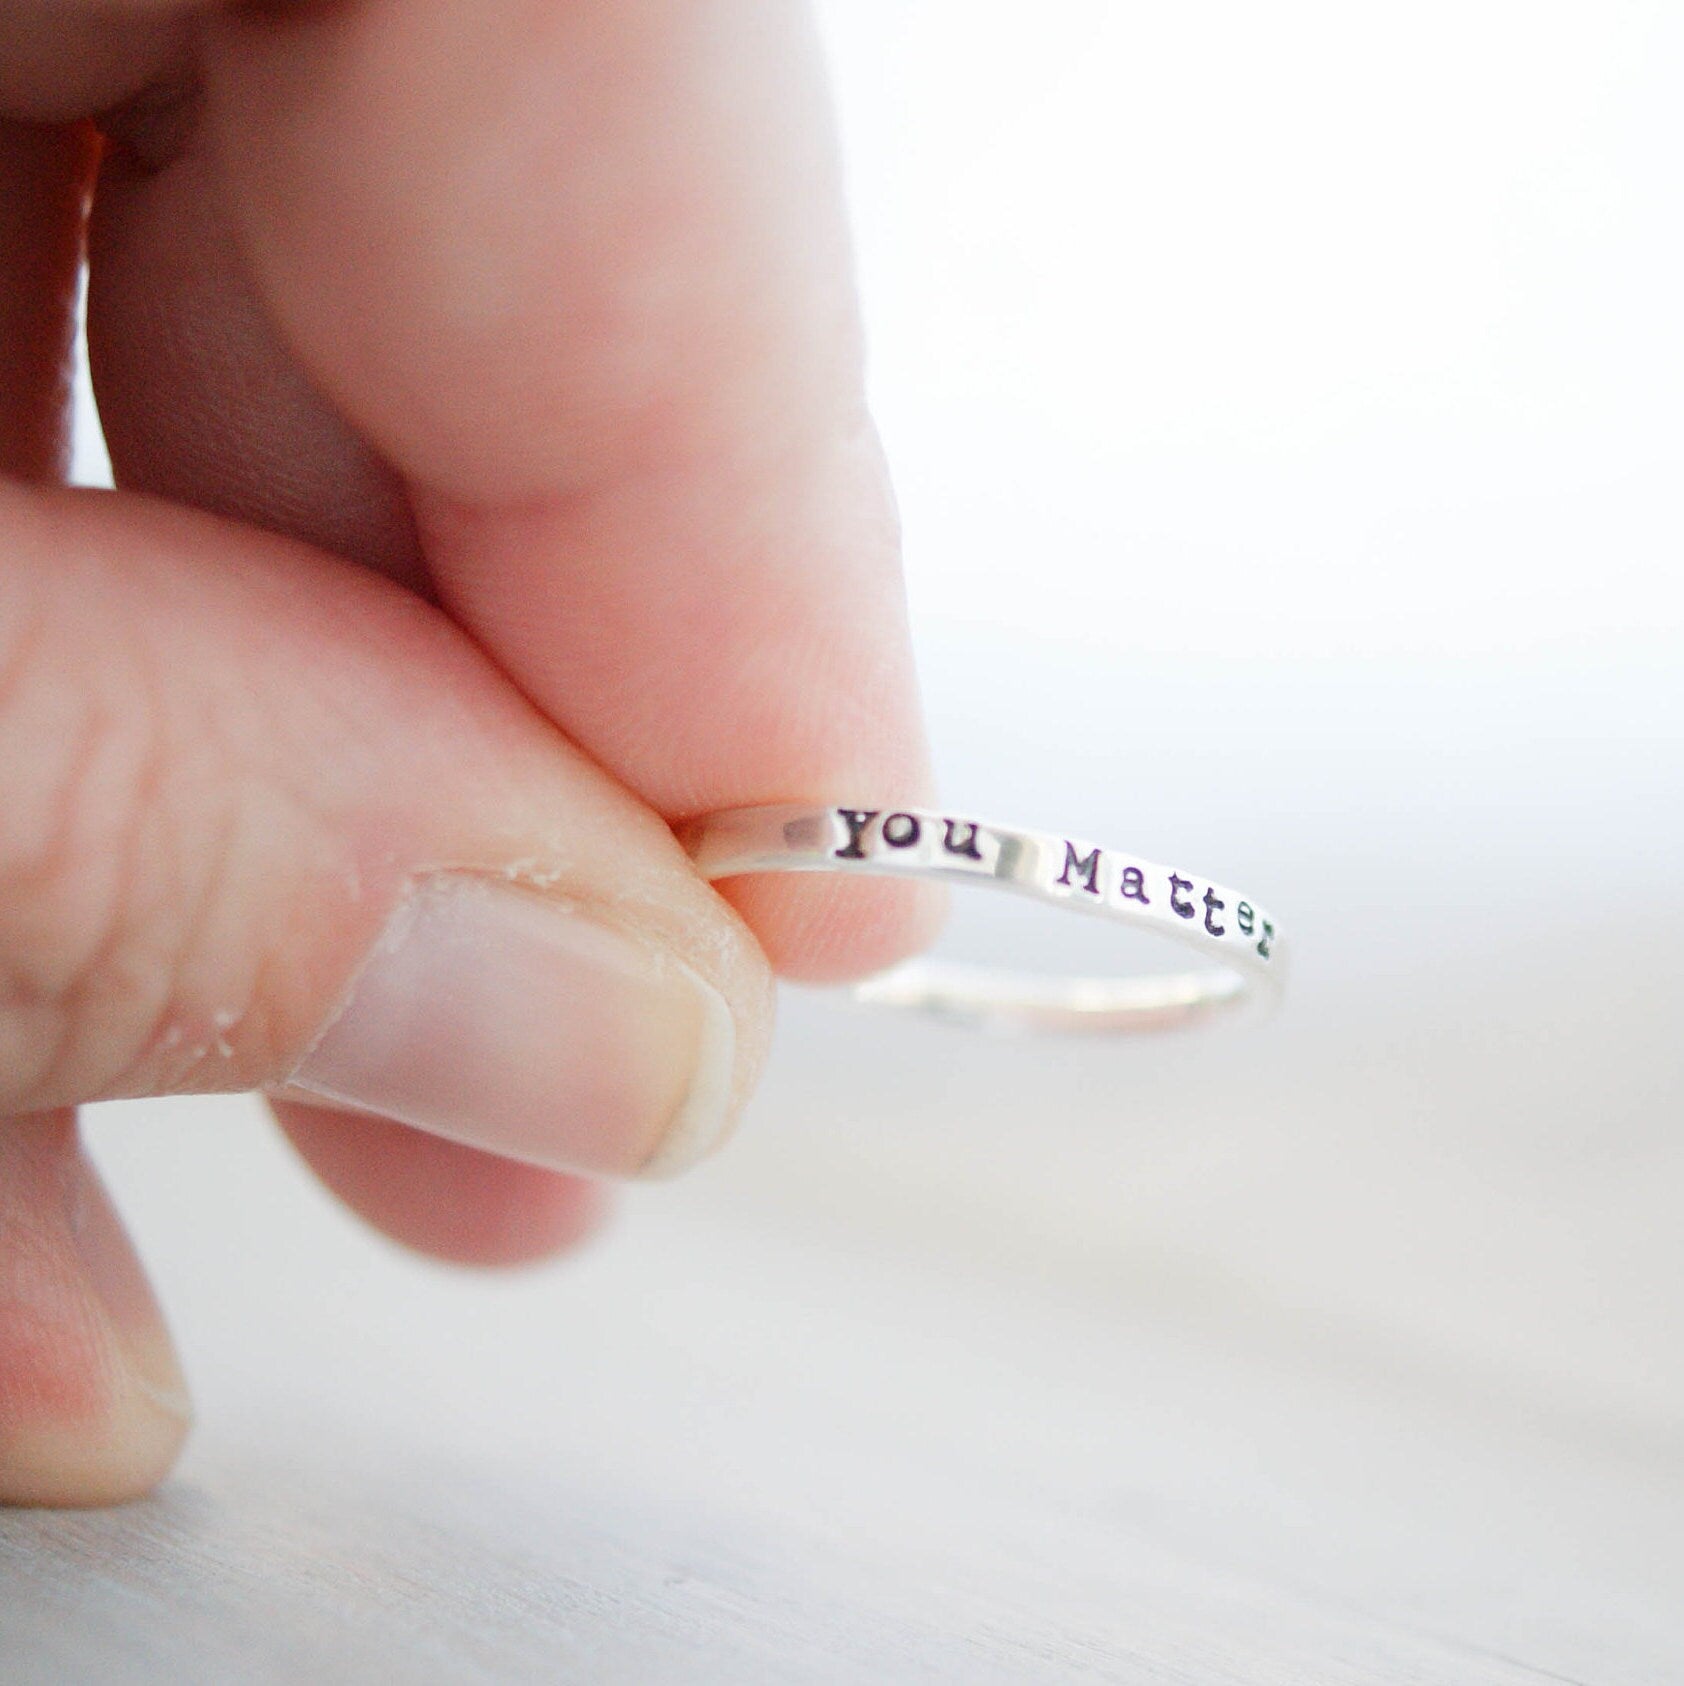 Sterling silver ring stamped with you matter held between fingers